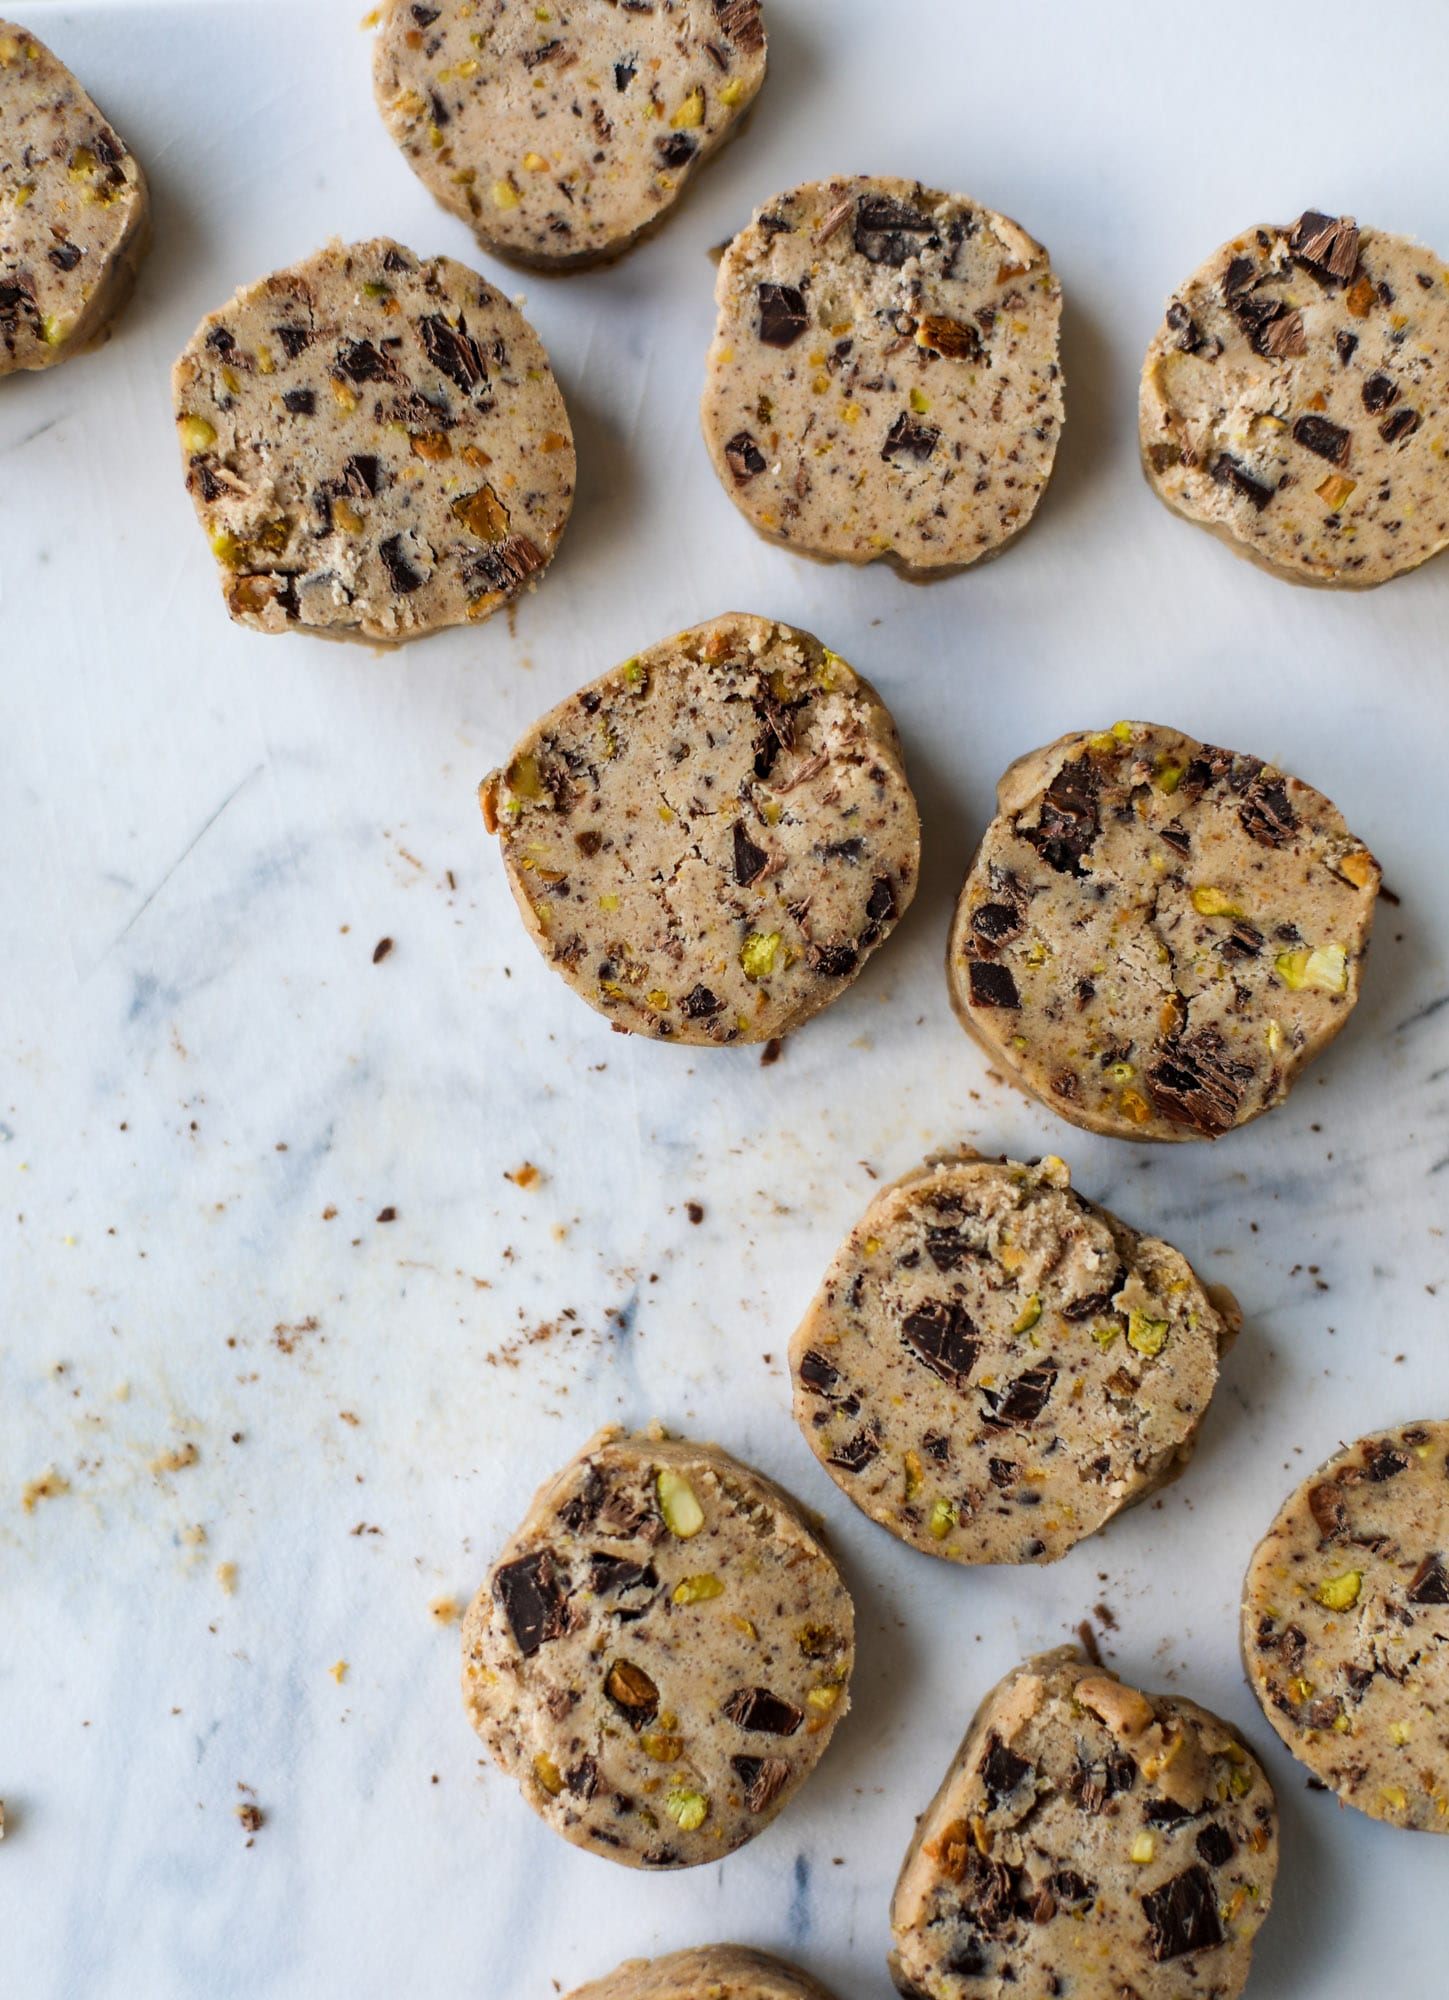 This chocolate pistachio shortbread recipe is the perfect combo of sweet and salty in a crunchy cookie! Melty, rich dark chocolate comes together with roasted, salted pistachios to make a delicious crunchy cookie! I howsweeteats.com #chocolate #pistachio #shortbread